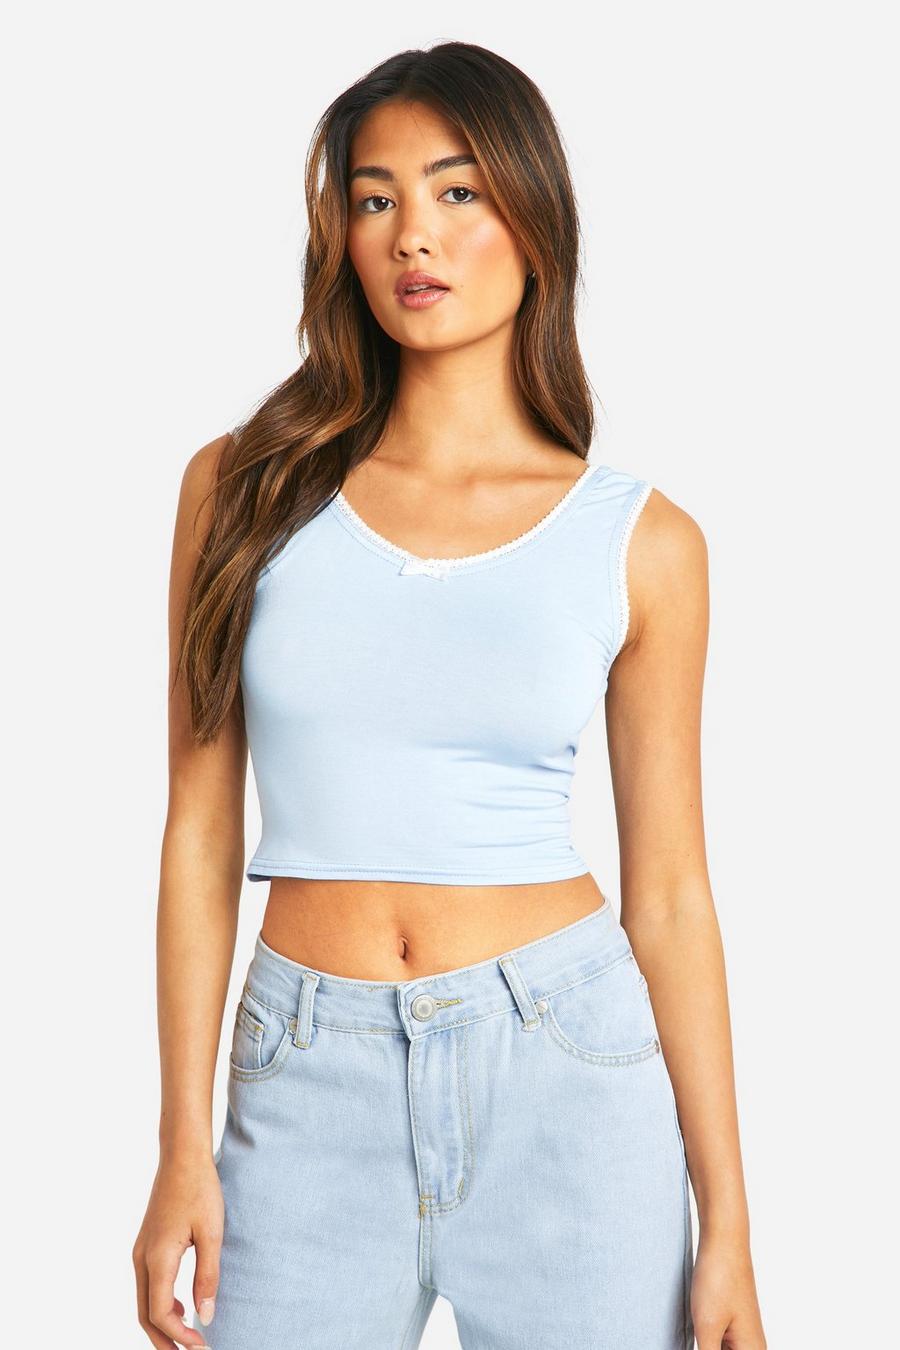 Baby blue Wide Strap Scoop Neck Bow Trim Tank Top